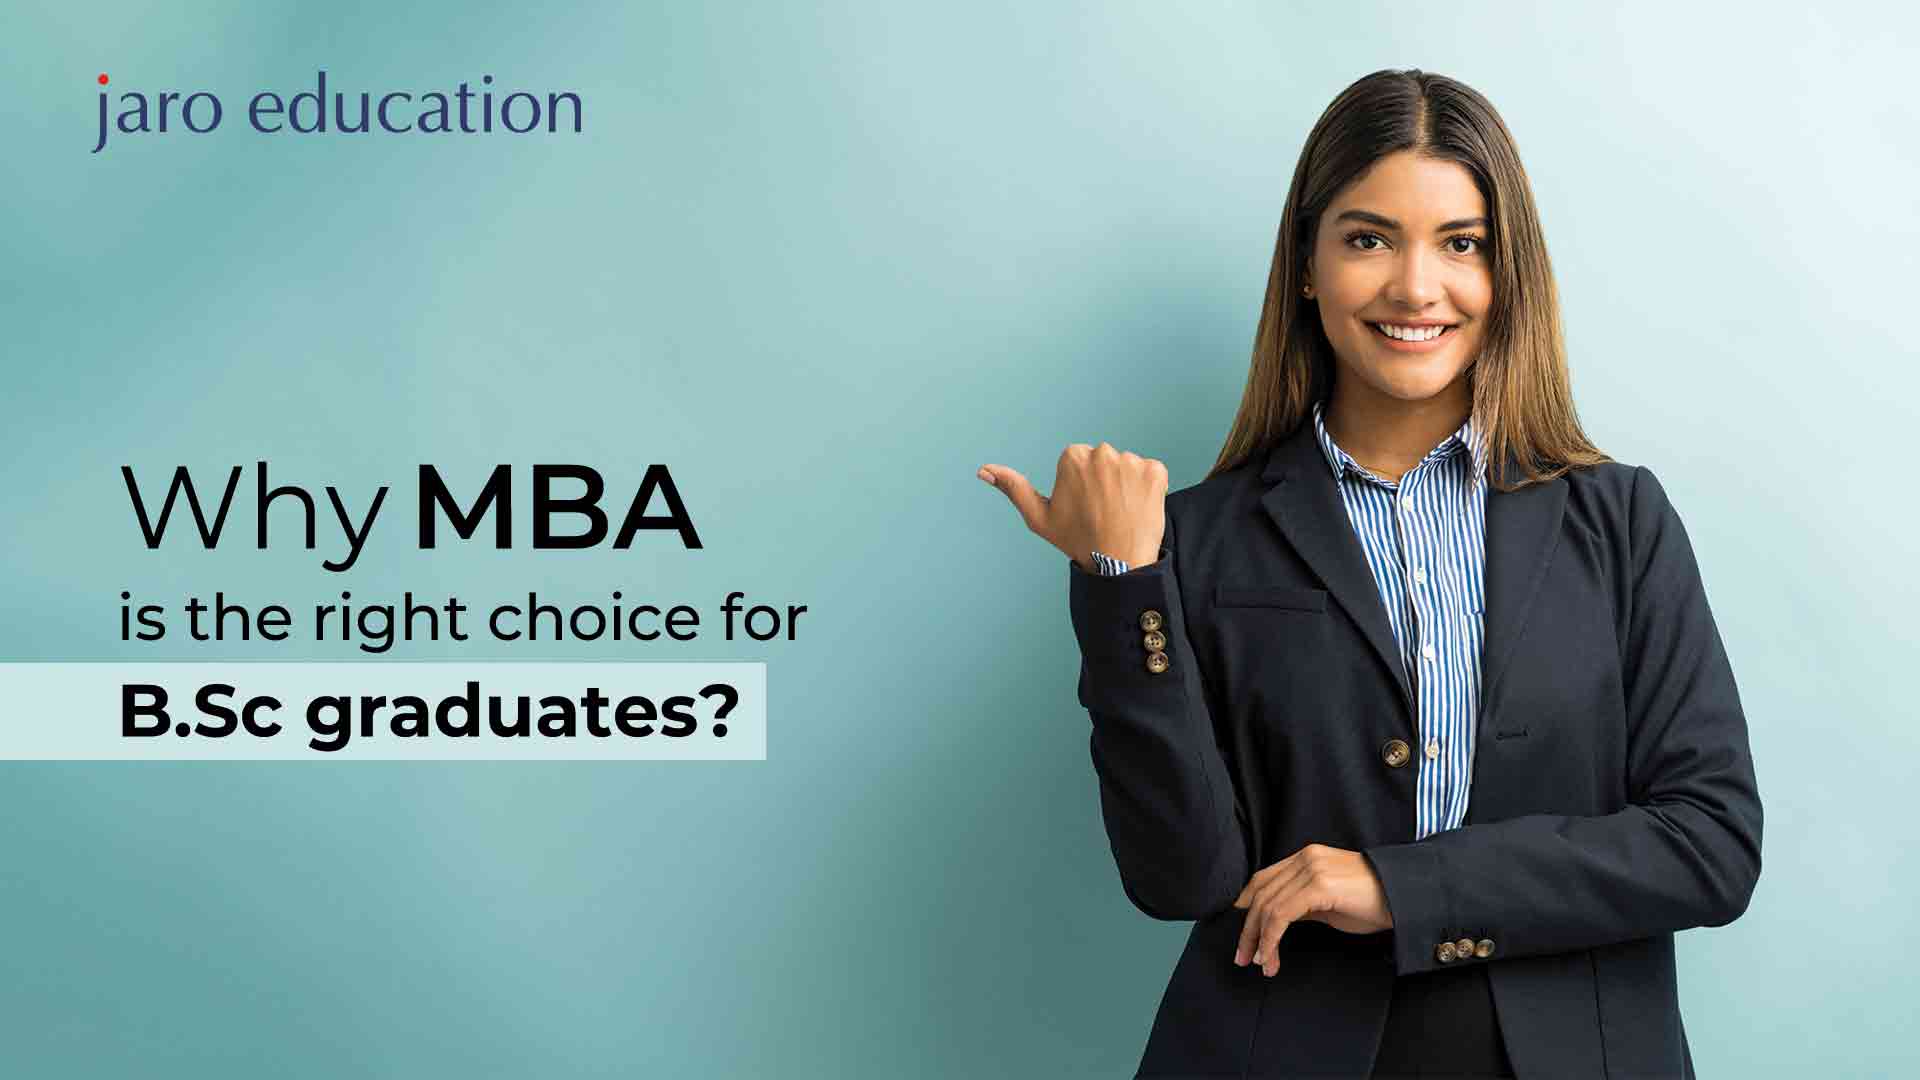 Why MBA is the right choice for B.Sc graduates